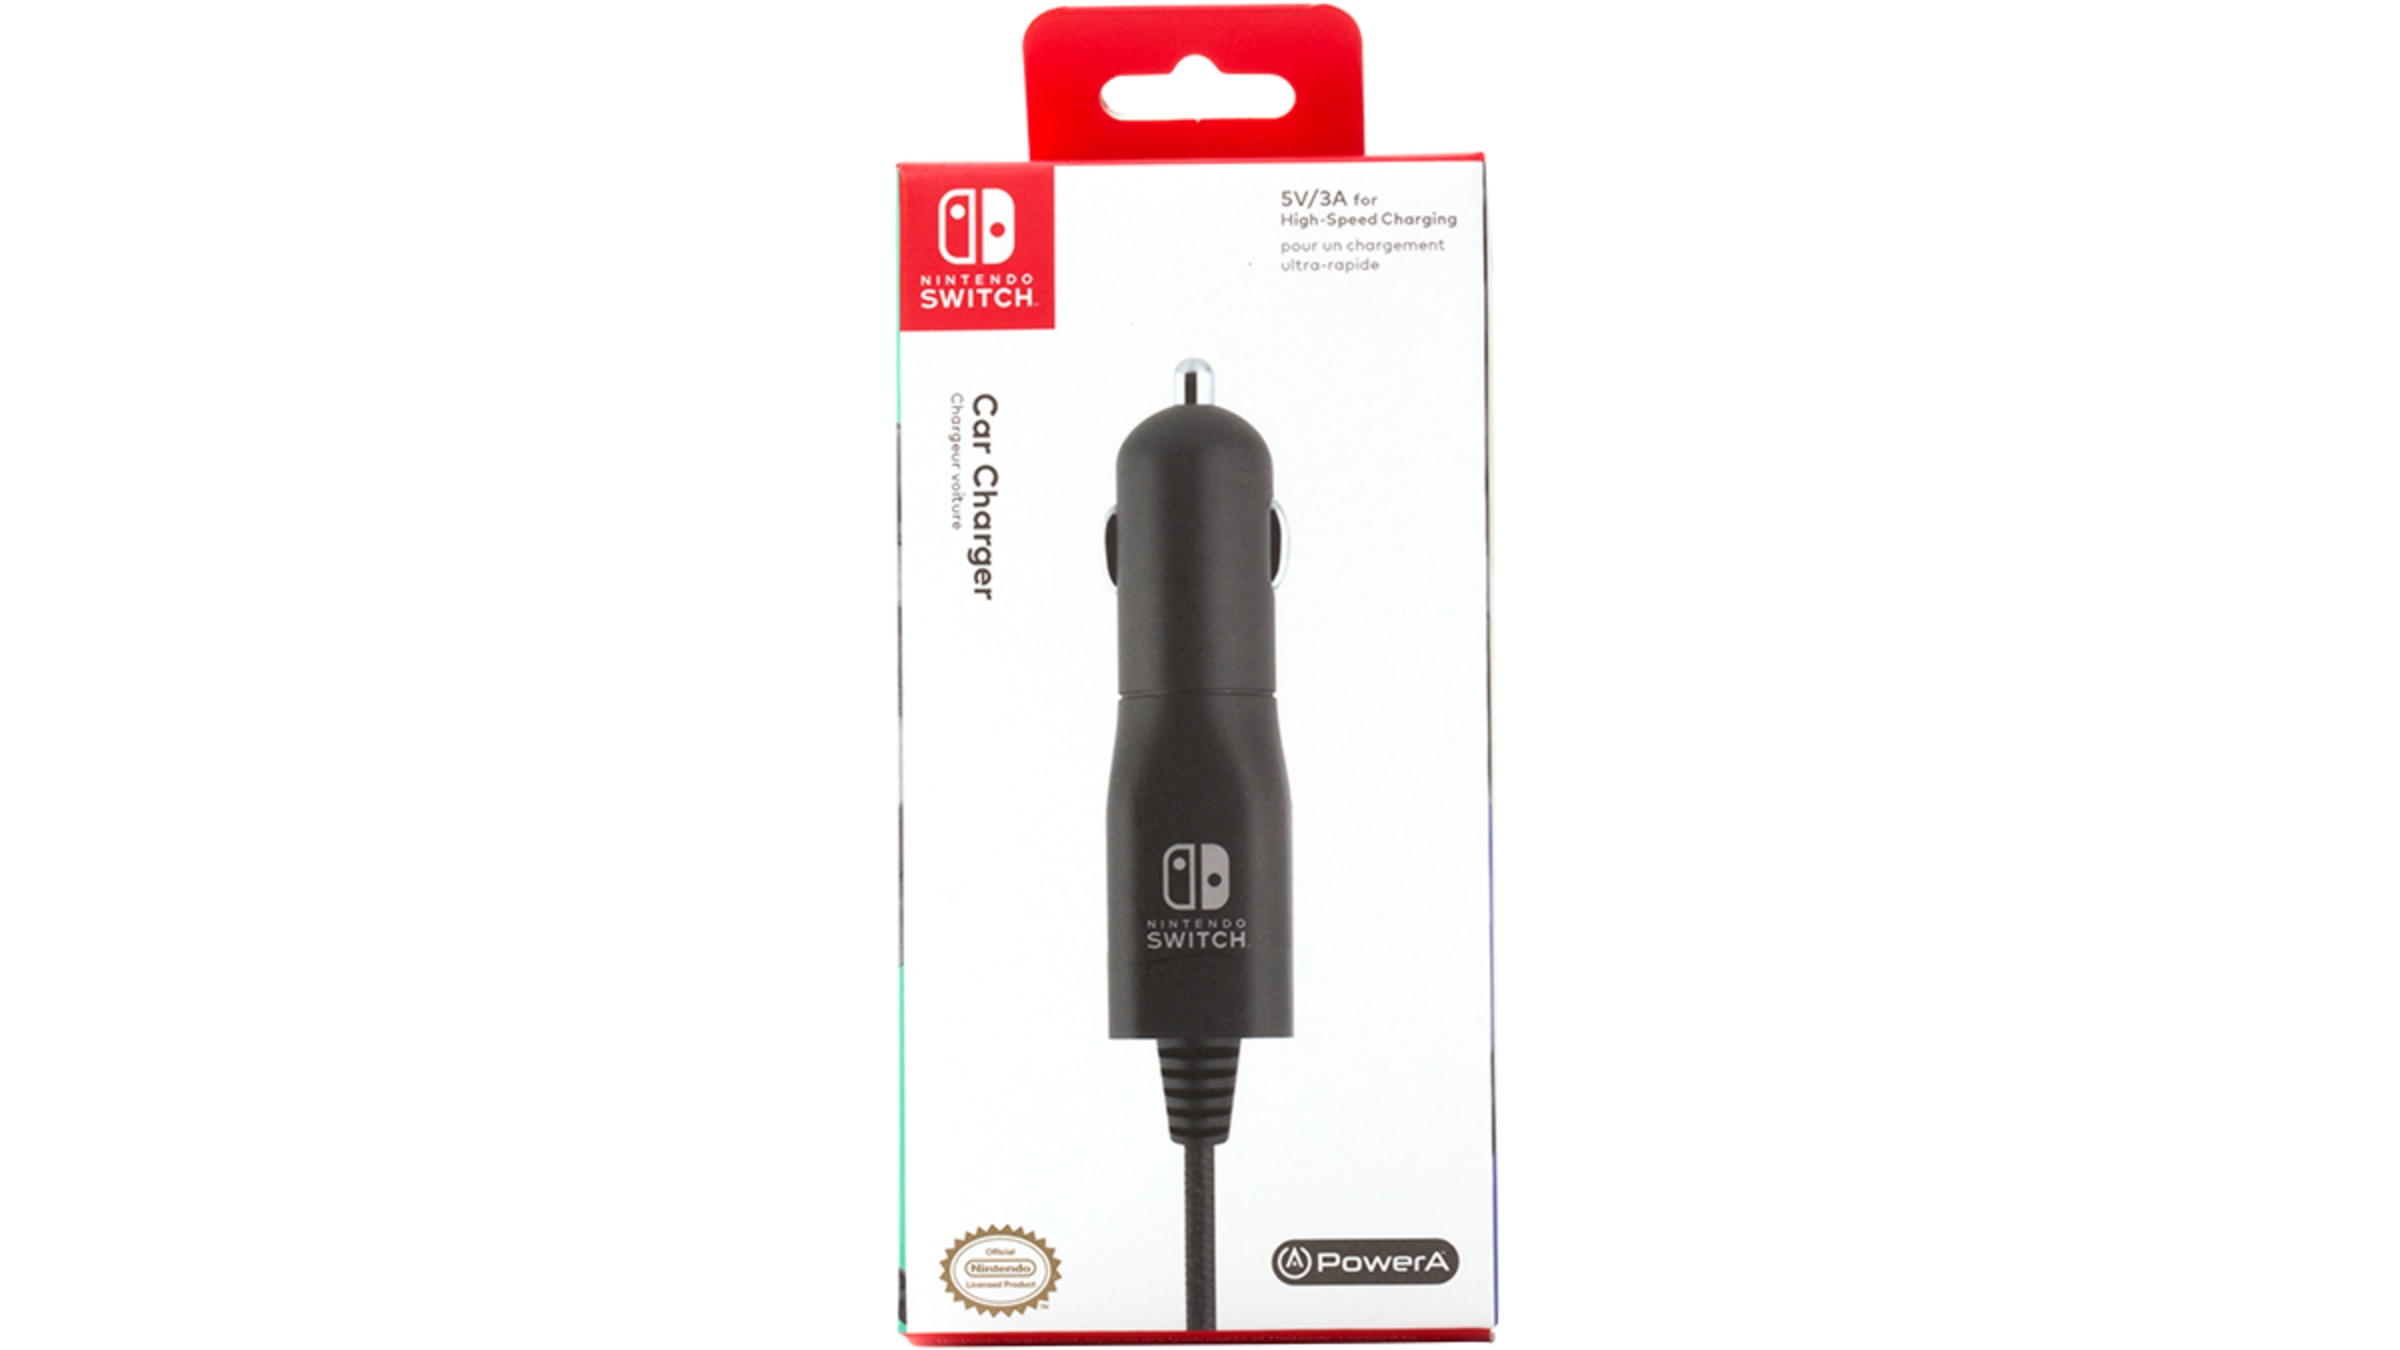 Chargeur allume-cigare voiture USB C Type C 12W Nintendo Switch, Switch Lite,  Switch Pro Controller